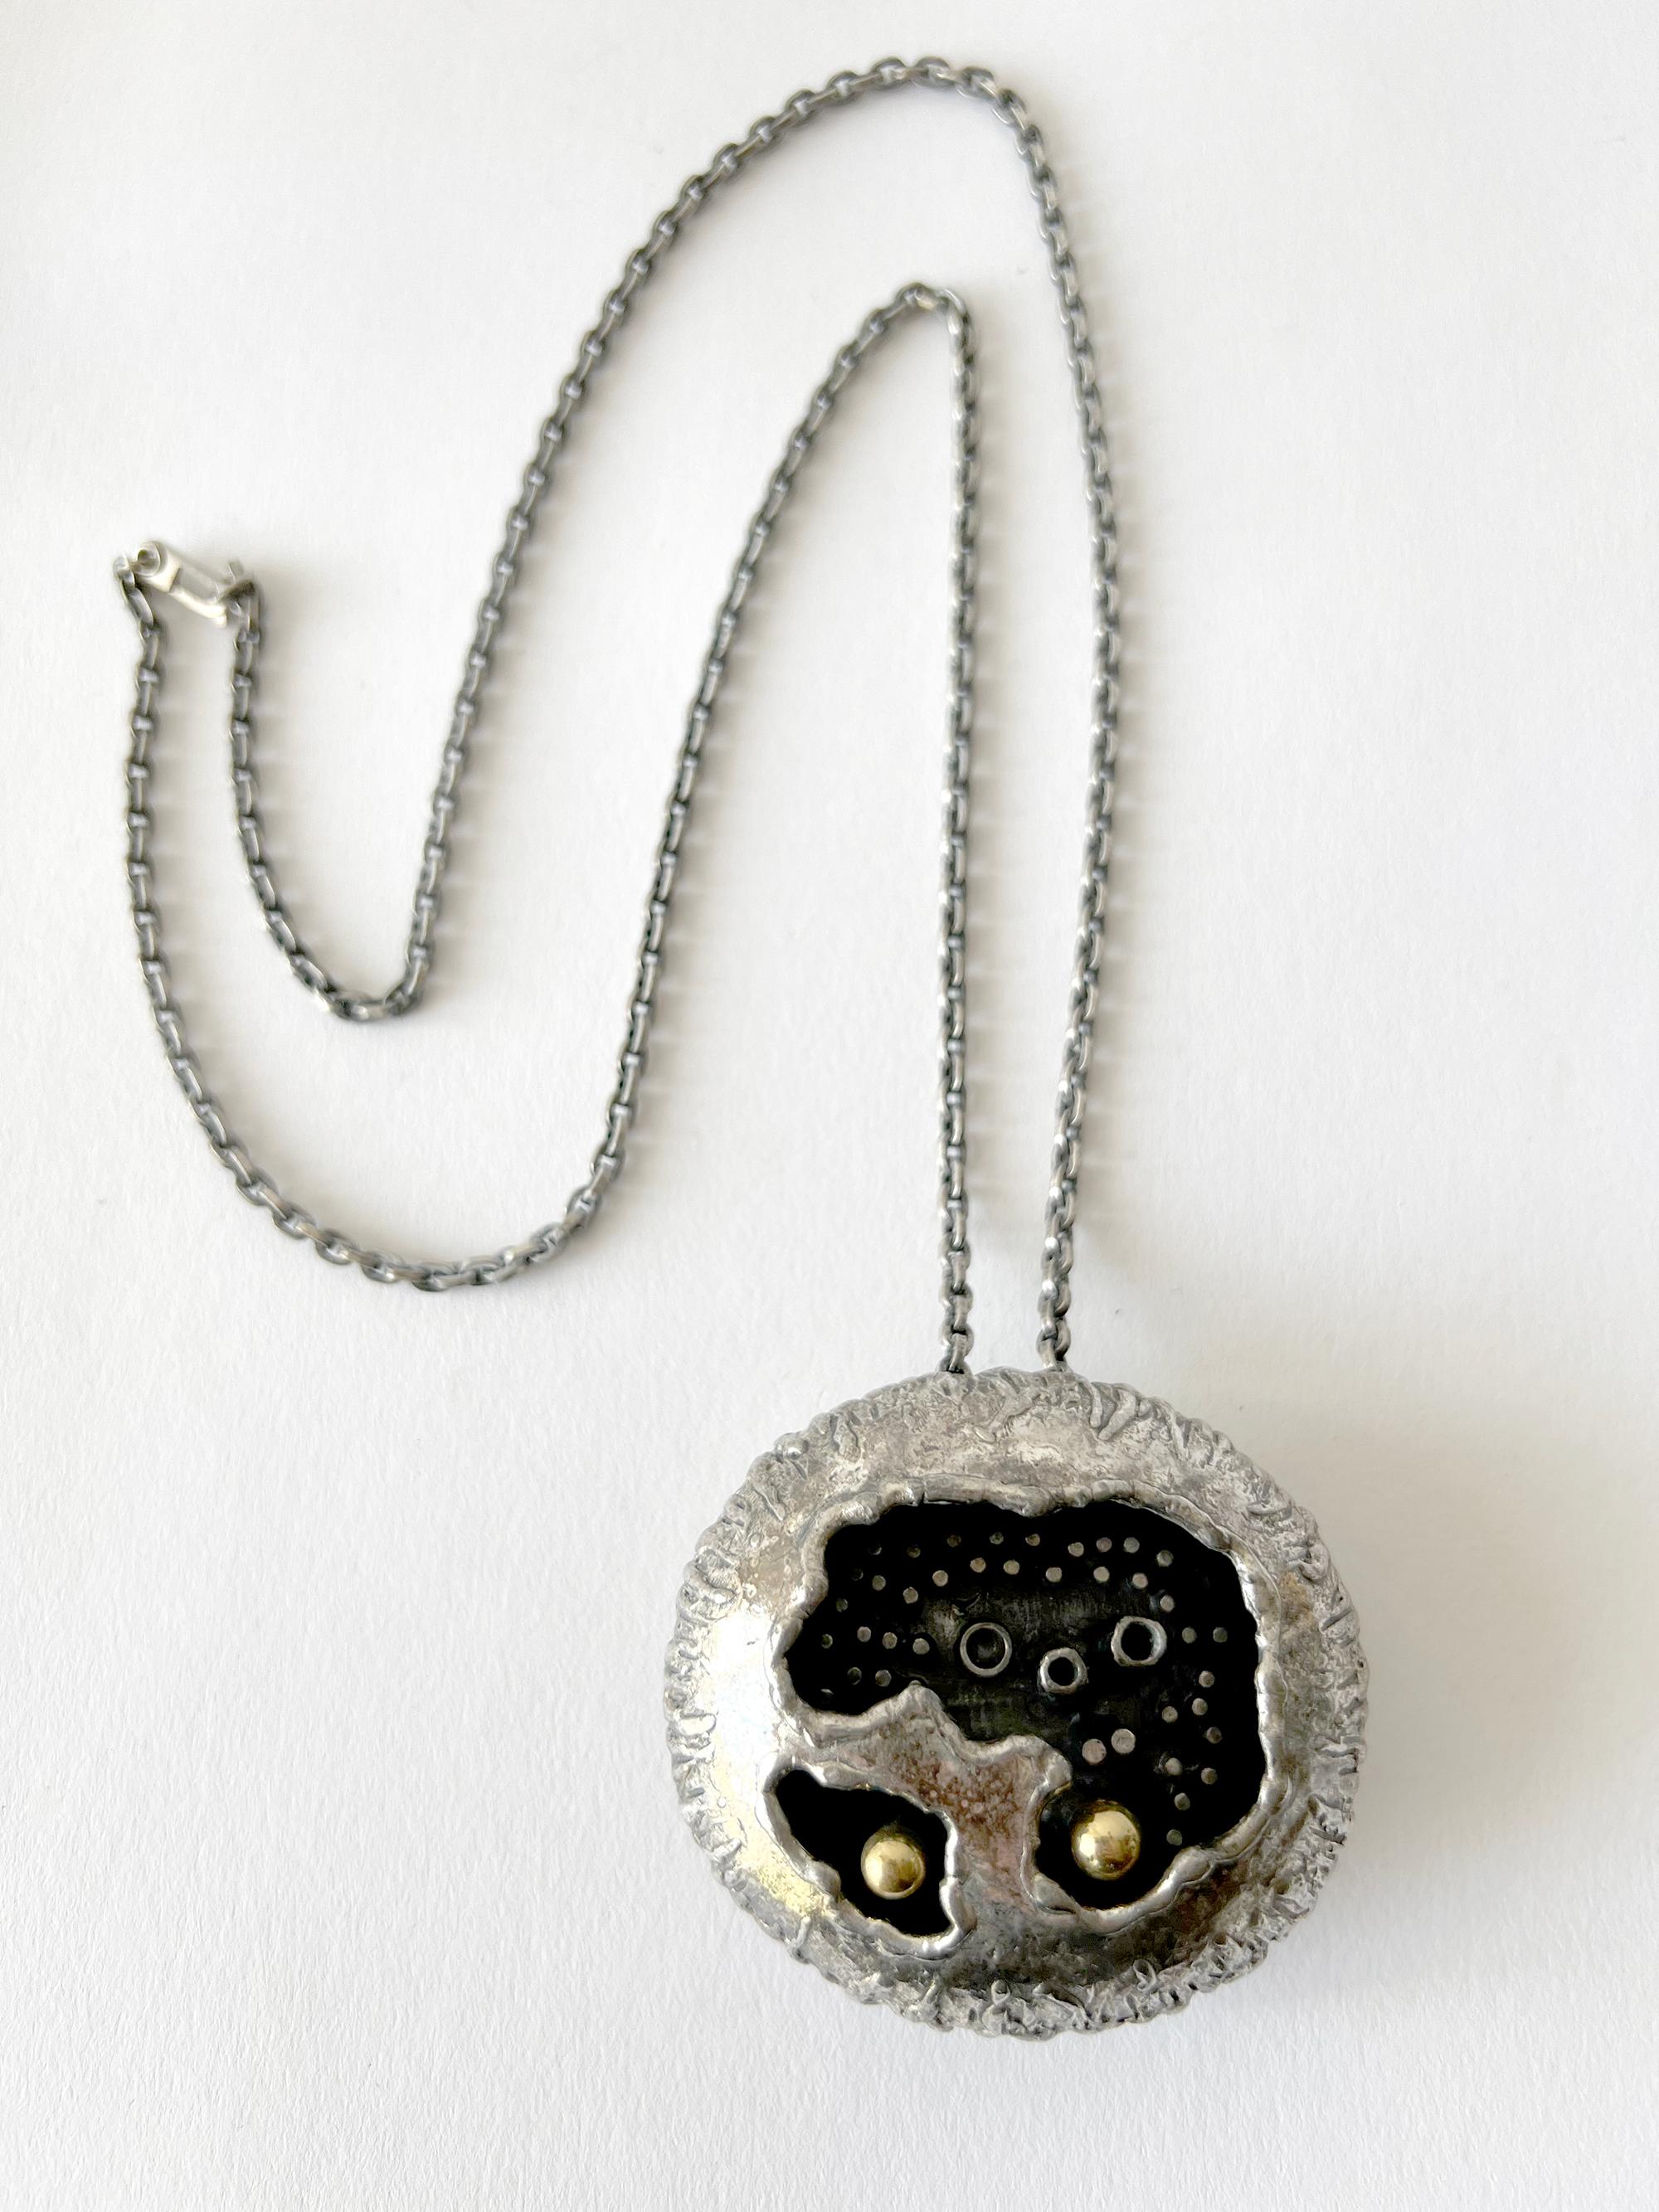 Brutalist pewter alloy necklace created by sculptor and jeweler Guy Vidal of Canada.  Pod measures 2.5